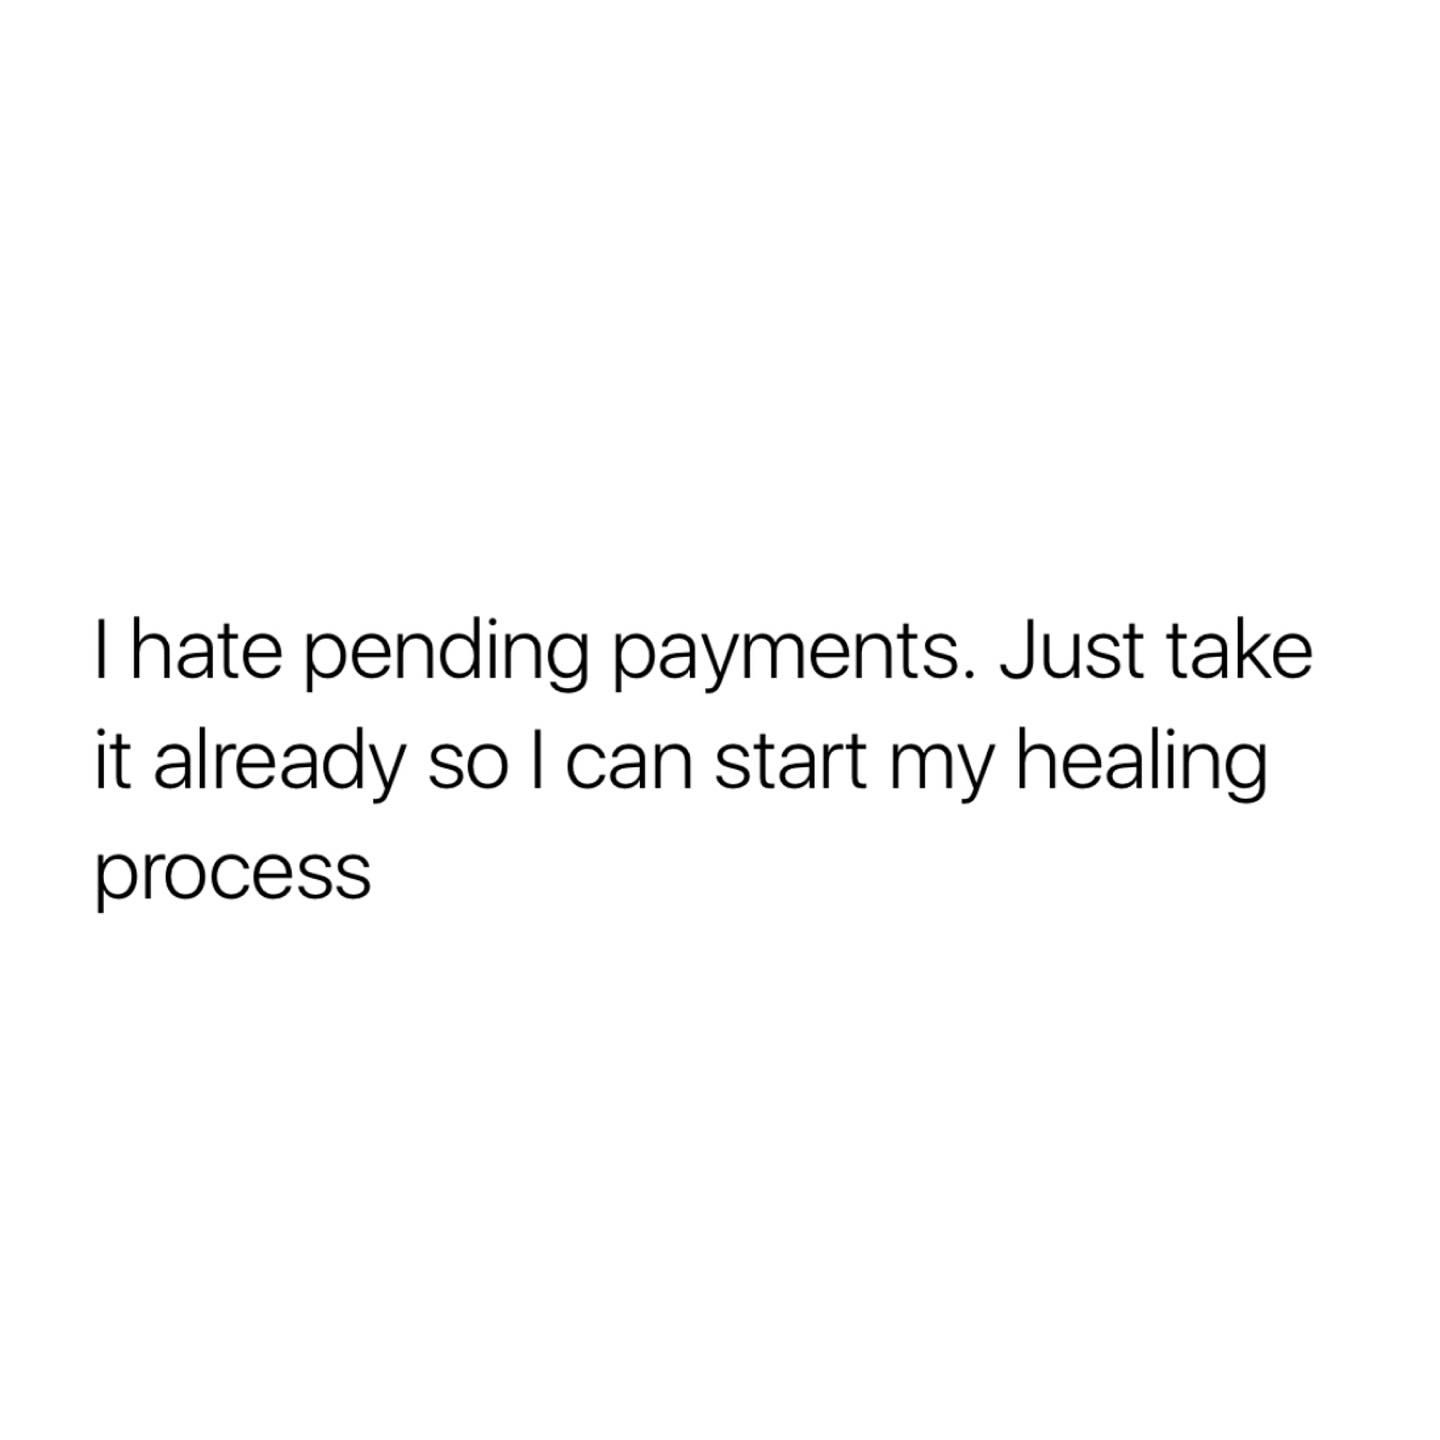 I hate pending payments. Just take it already so I can start my healing process.